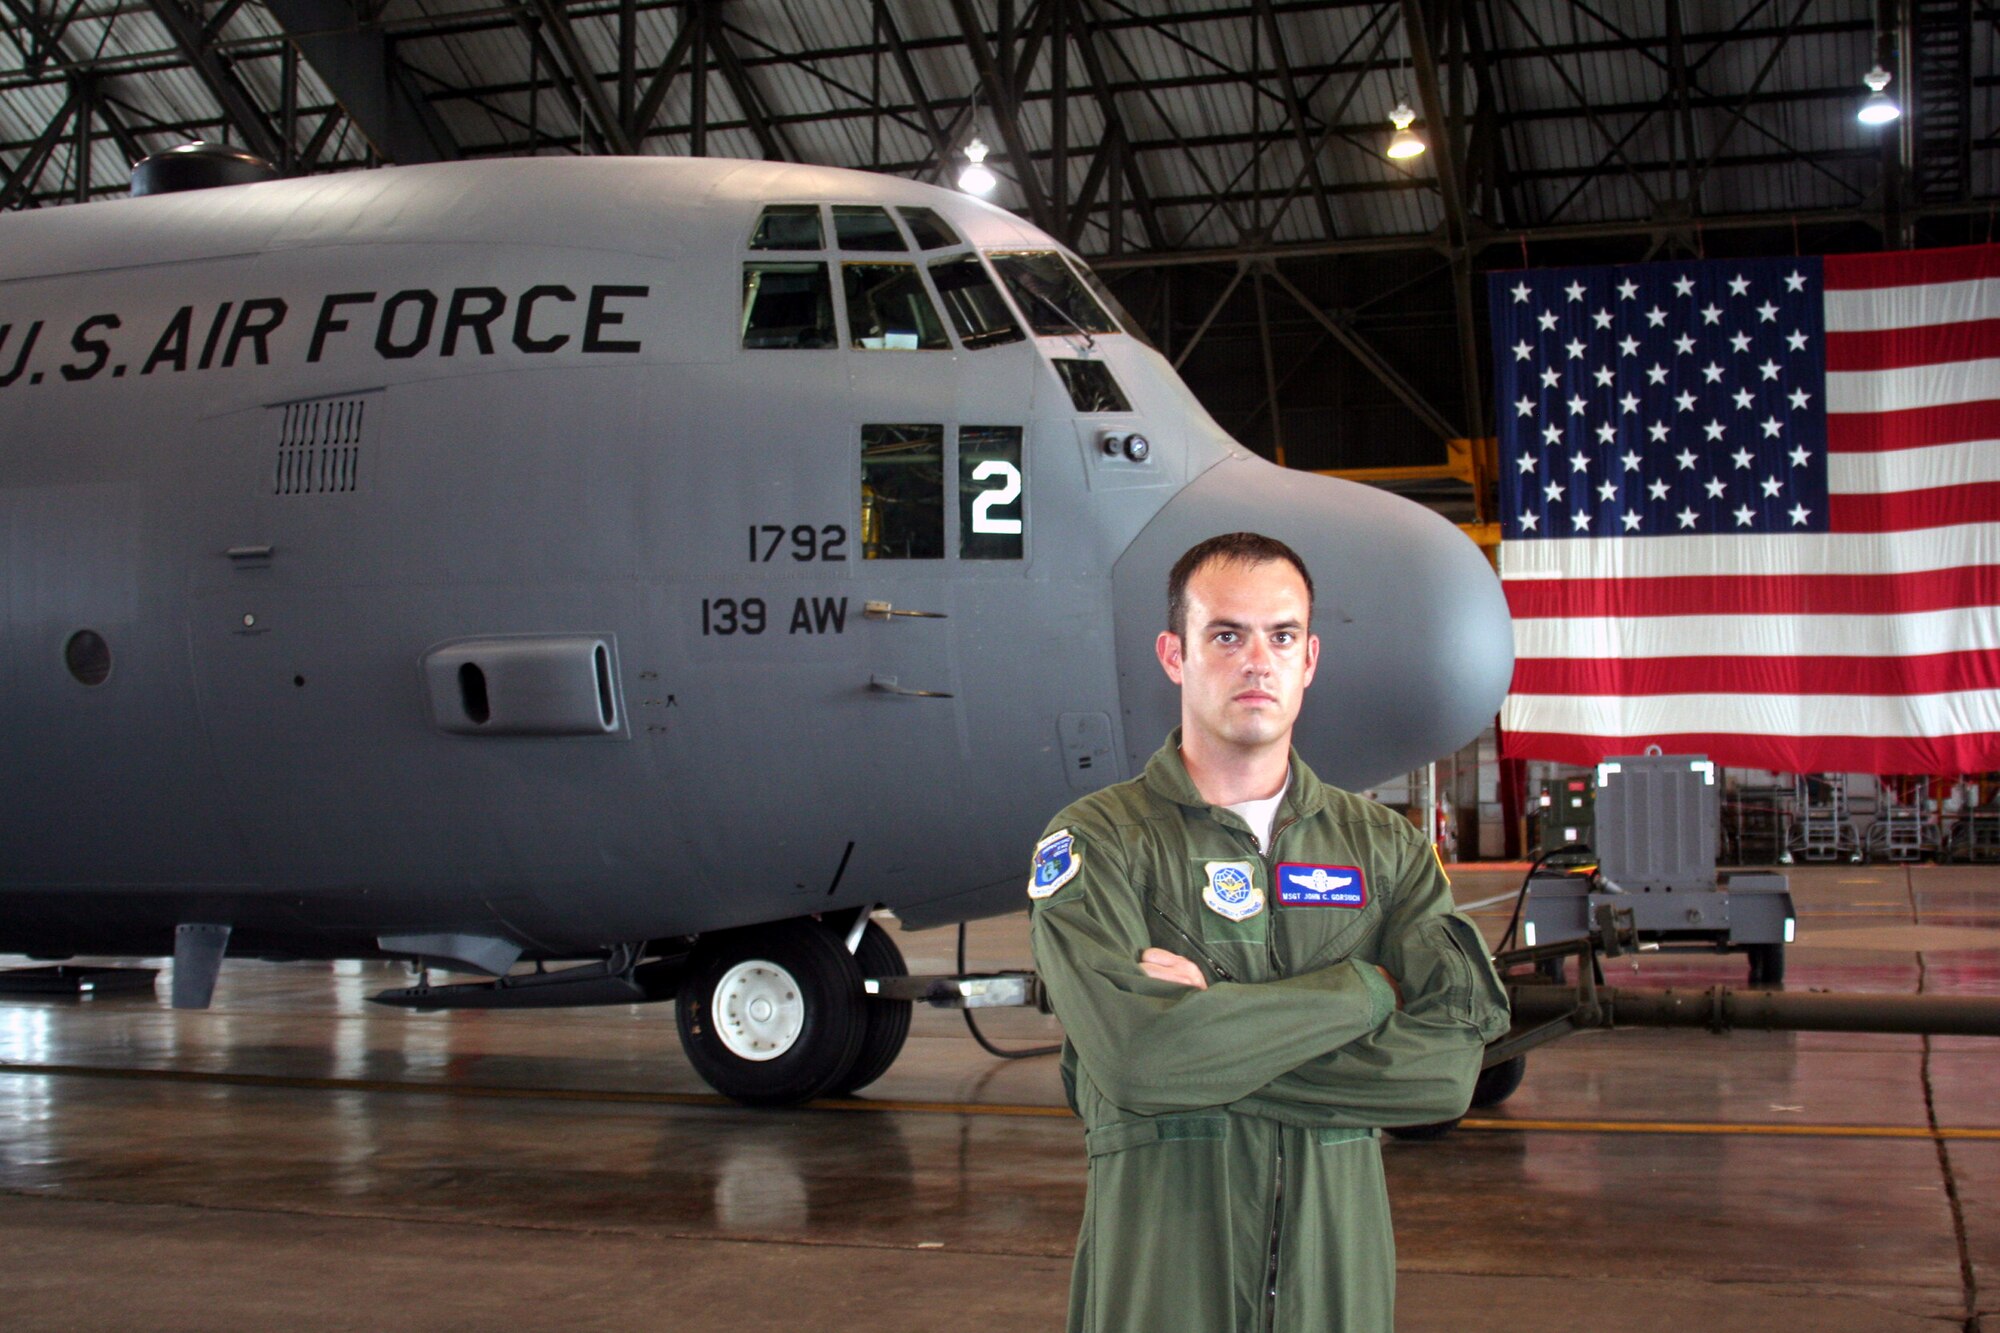 Master Sgt. John Gorsuch is C-130 Hercules loadmaster and instructor for Air Mobility Command's Detachment 5 at the Advanced Airlift Tactics Training Center at St. Joseph, Mo. Here he is pictured at Scott Air Force Base, Ill., on Aug. 20, 2010. (U.S. Air Force Photo/Master Sgt. Scott T. Sturkol)